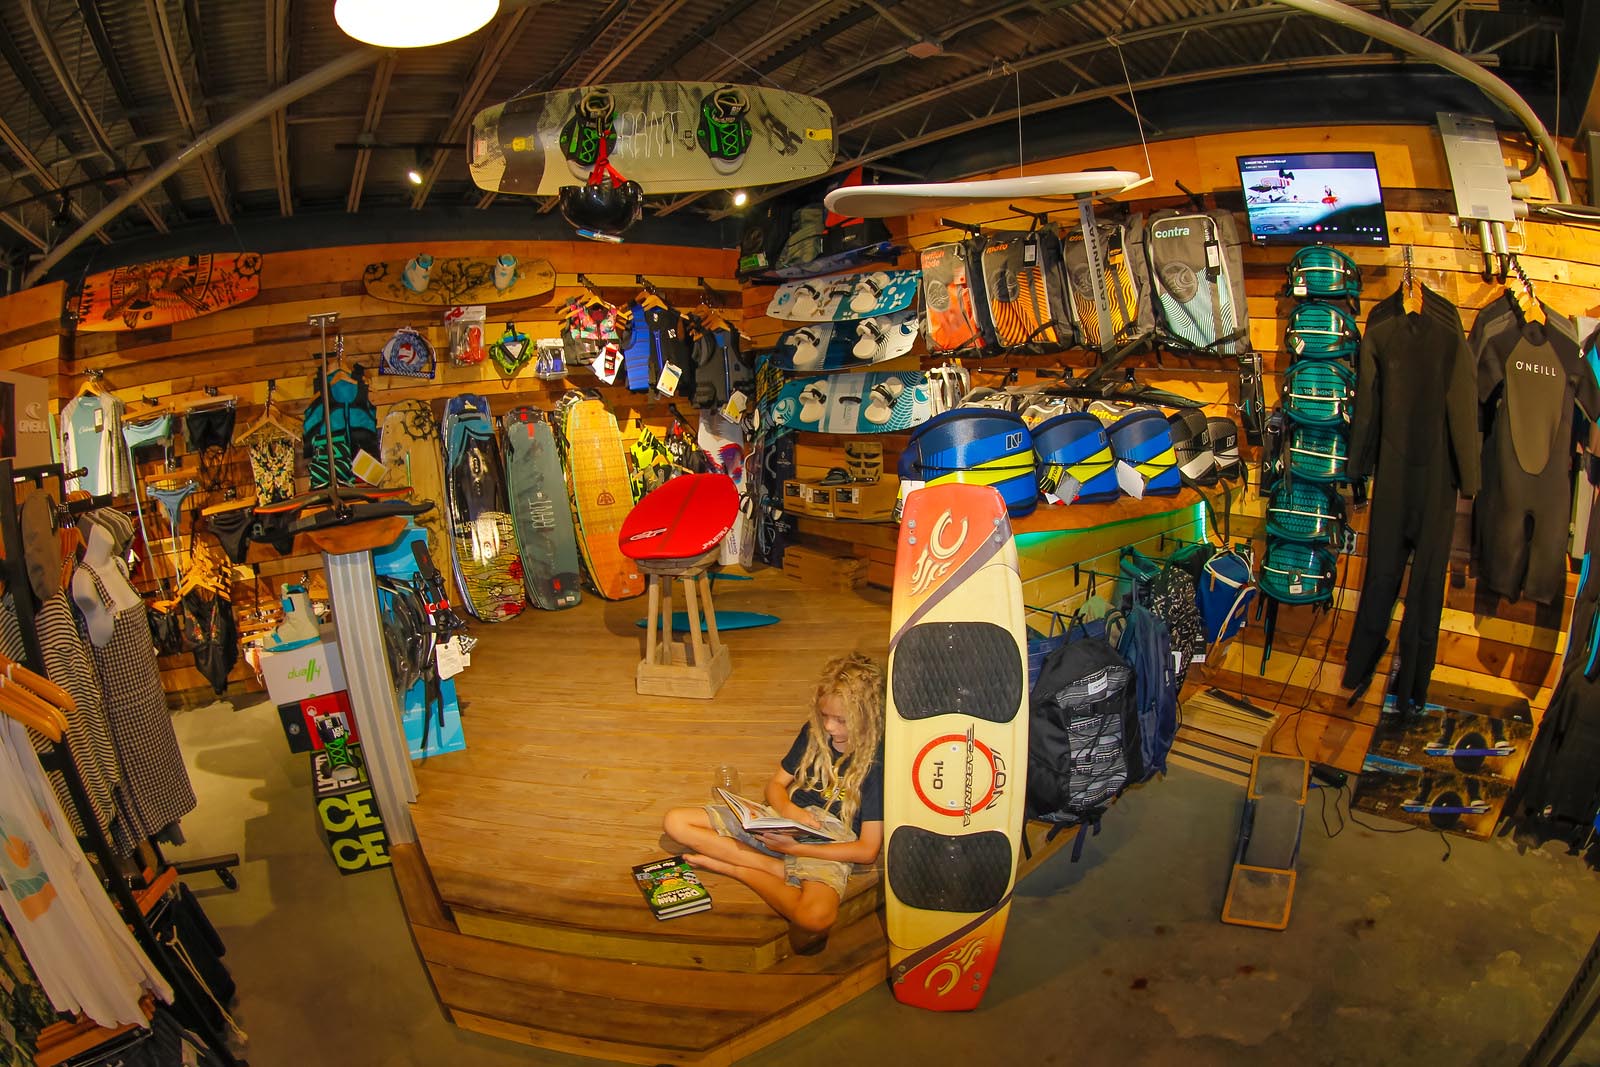 Otherside Boardsports: A Comprehensive Guide to Their Story, Mission, and Products.